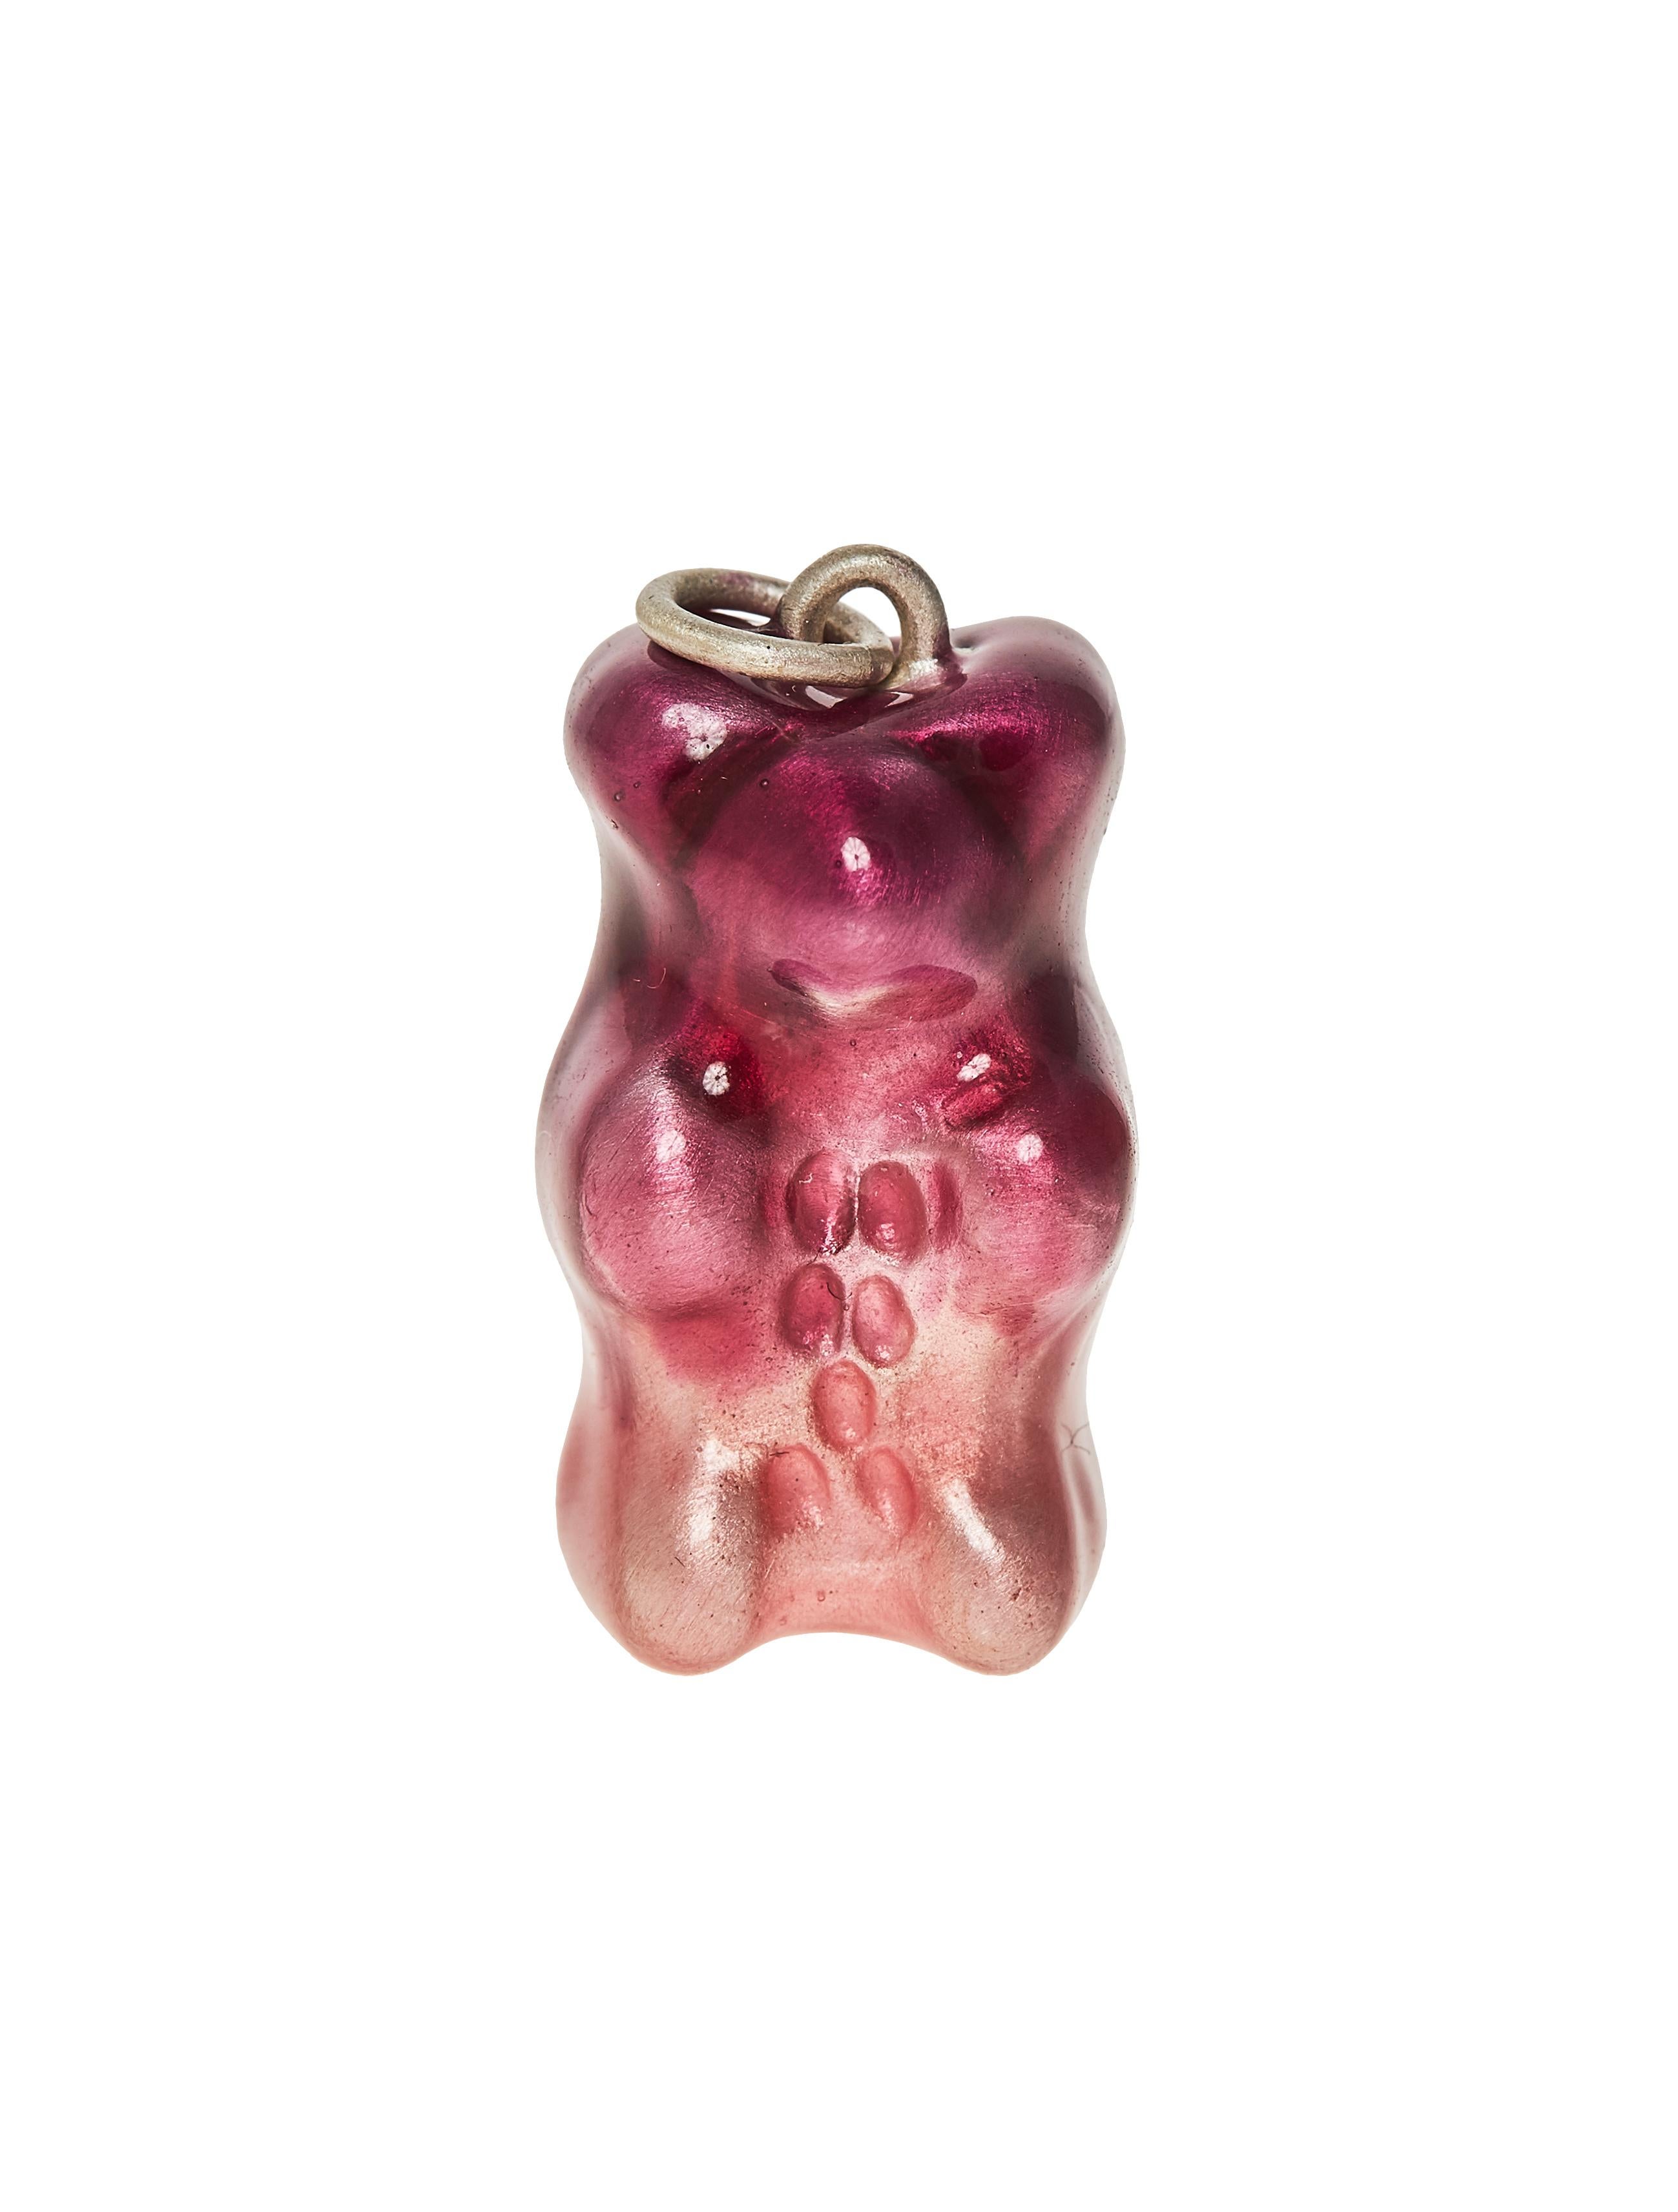 Ombre Plum  Gummy bear 
Sterling silver plated  gummy bear pendant on silver  plated chain with transparent ombre plum  enamel coverage. 

The Gummy Project by Maggoosh is a capsule collection inspired by the designer's life in New York City and her